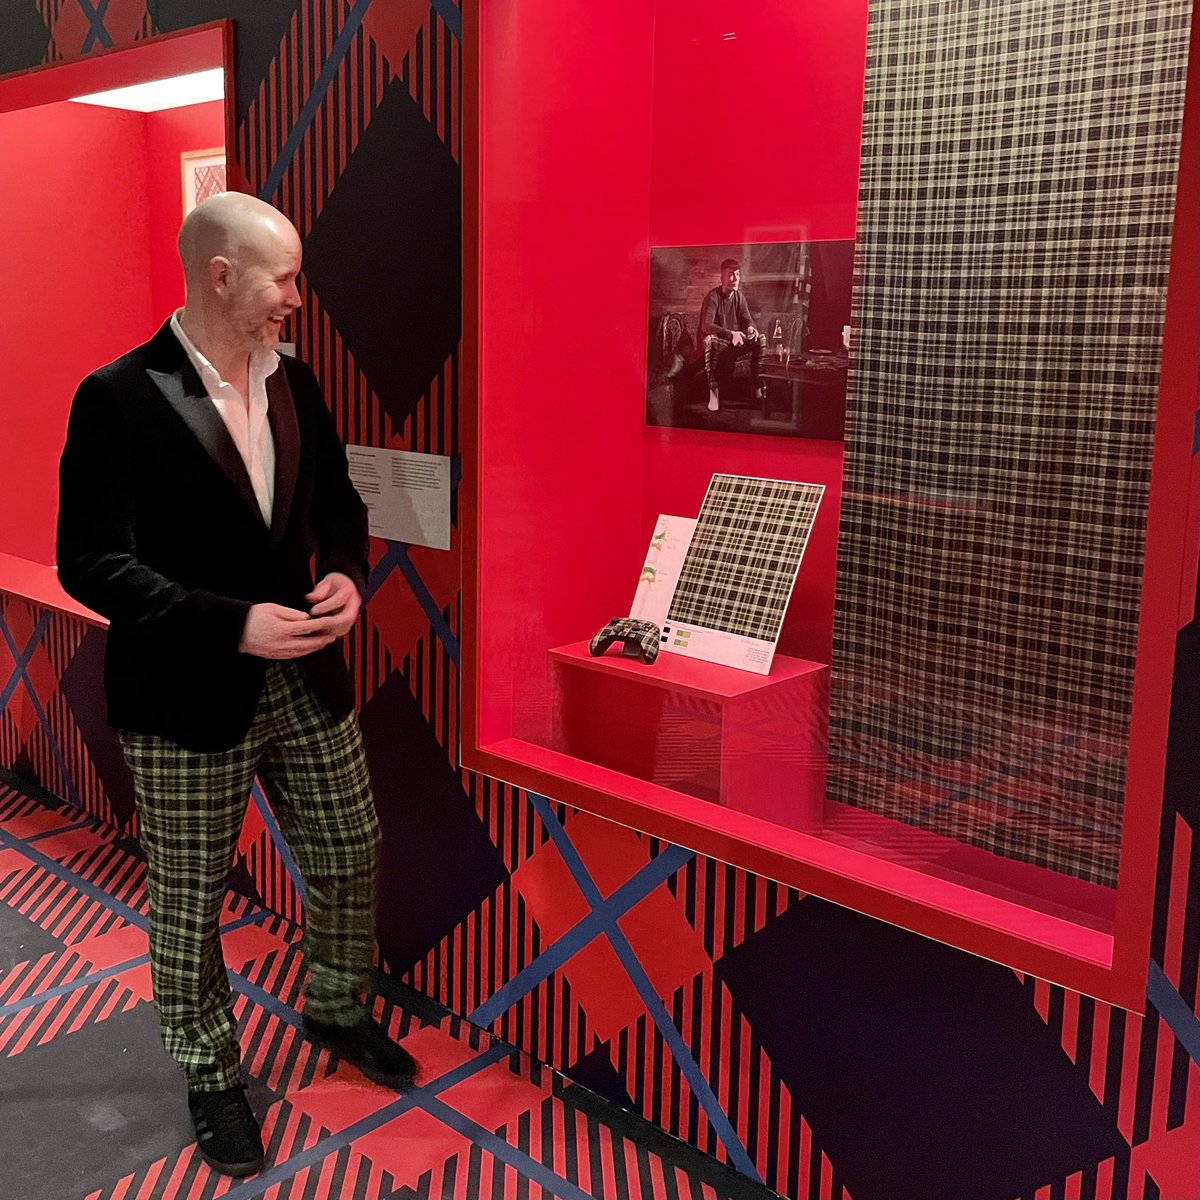 Last chance to see the Xbox Tartan for yourself at @VADundee this weekend. The whole exhibition is phenomenal! And if you want to have some Xbox tartan of your own: nicolsonkiltmakers.com/collections/gn…